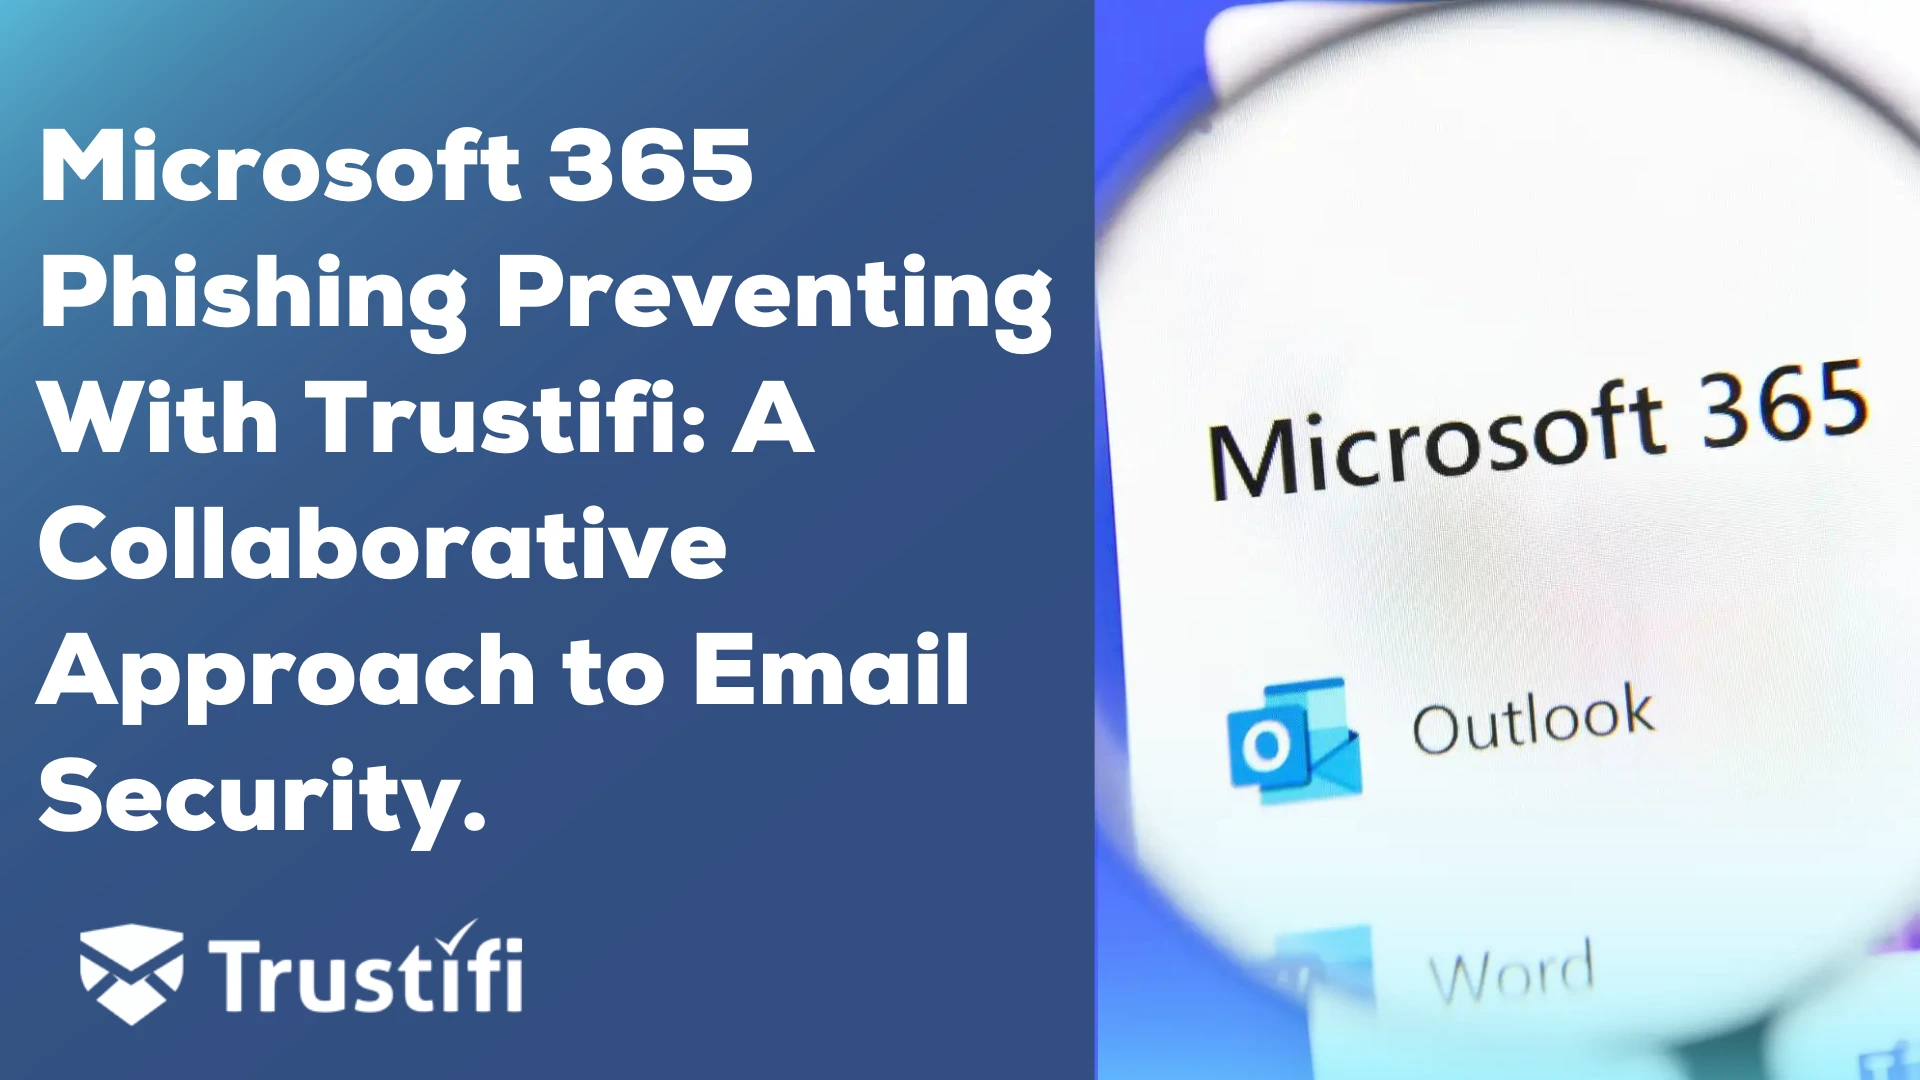 Microsoft 365 Phishing Preventing With Trustifi: A Collaborative Approach to Email Security